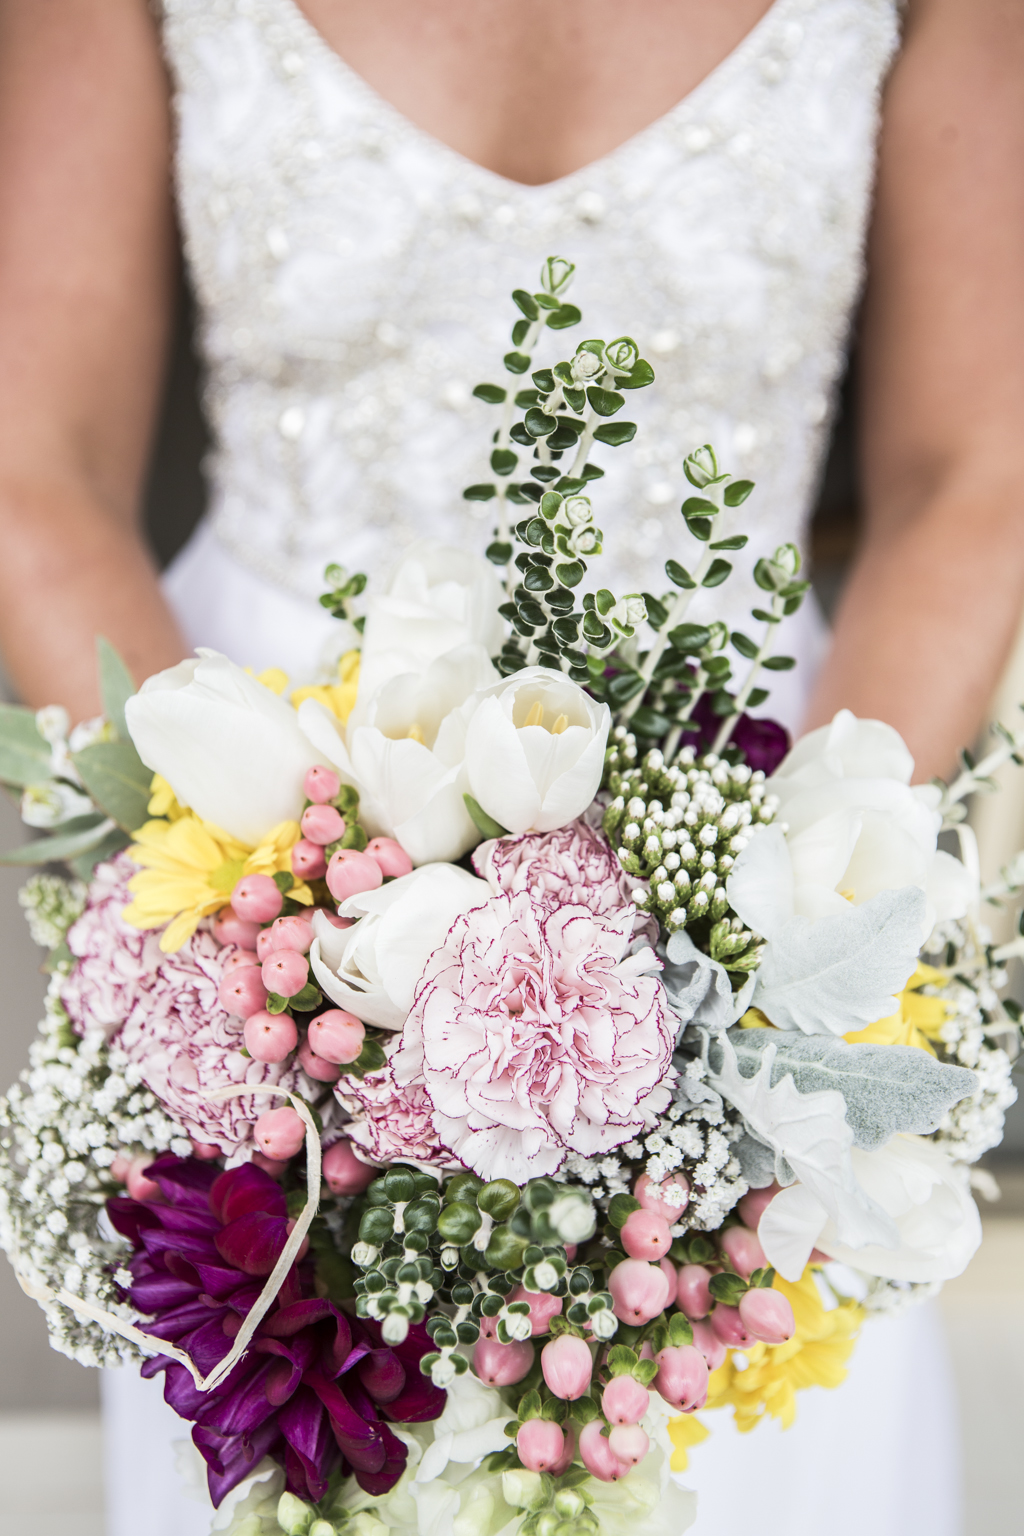 Stunning bouquet with beaded dress as background